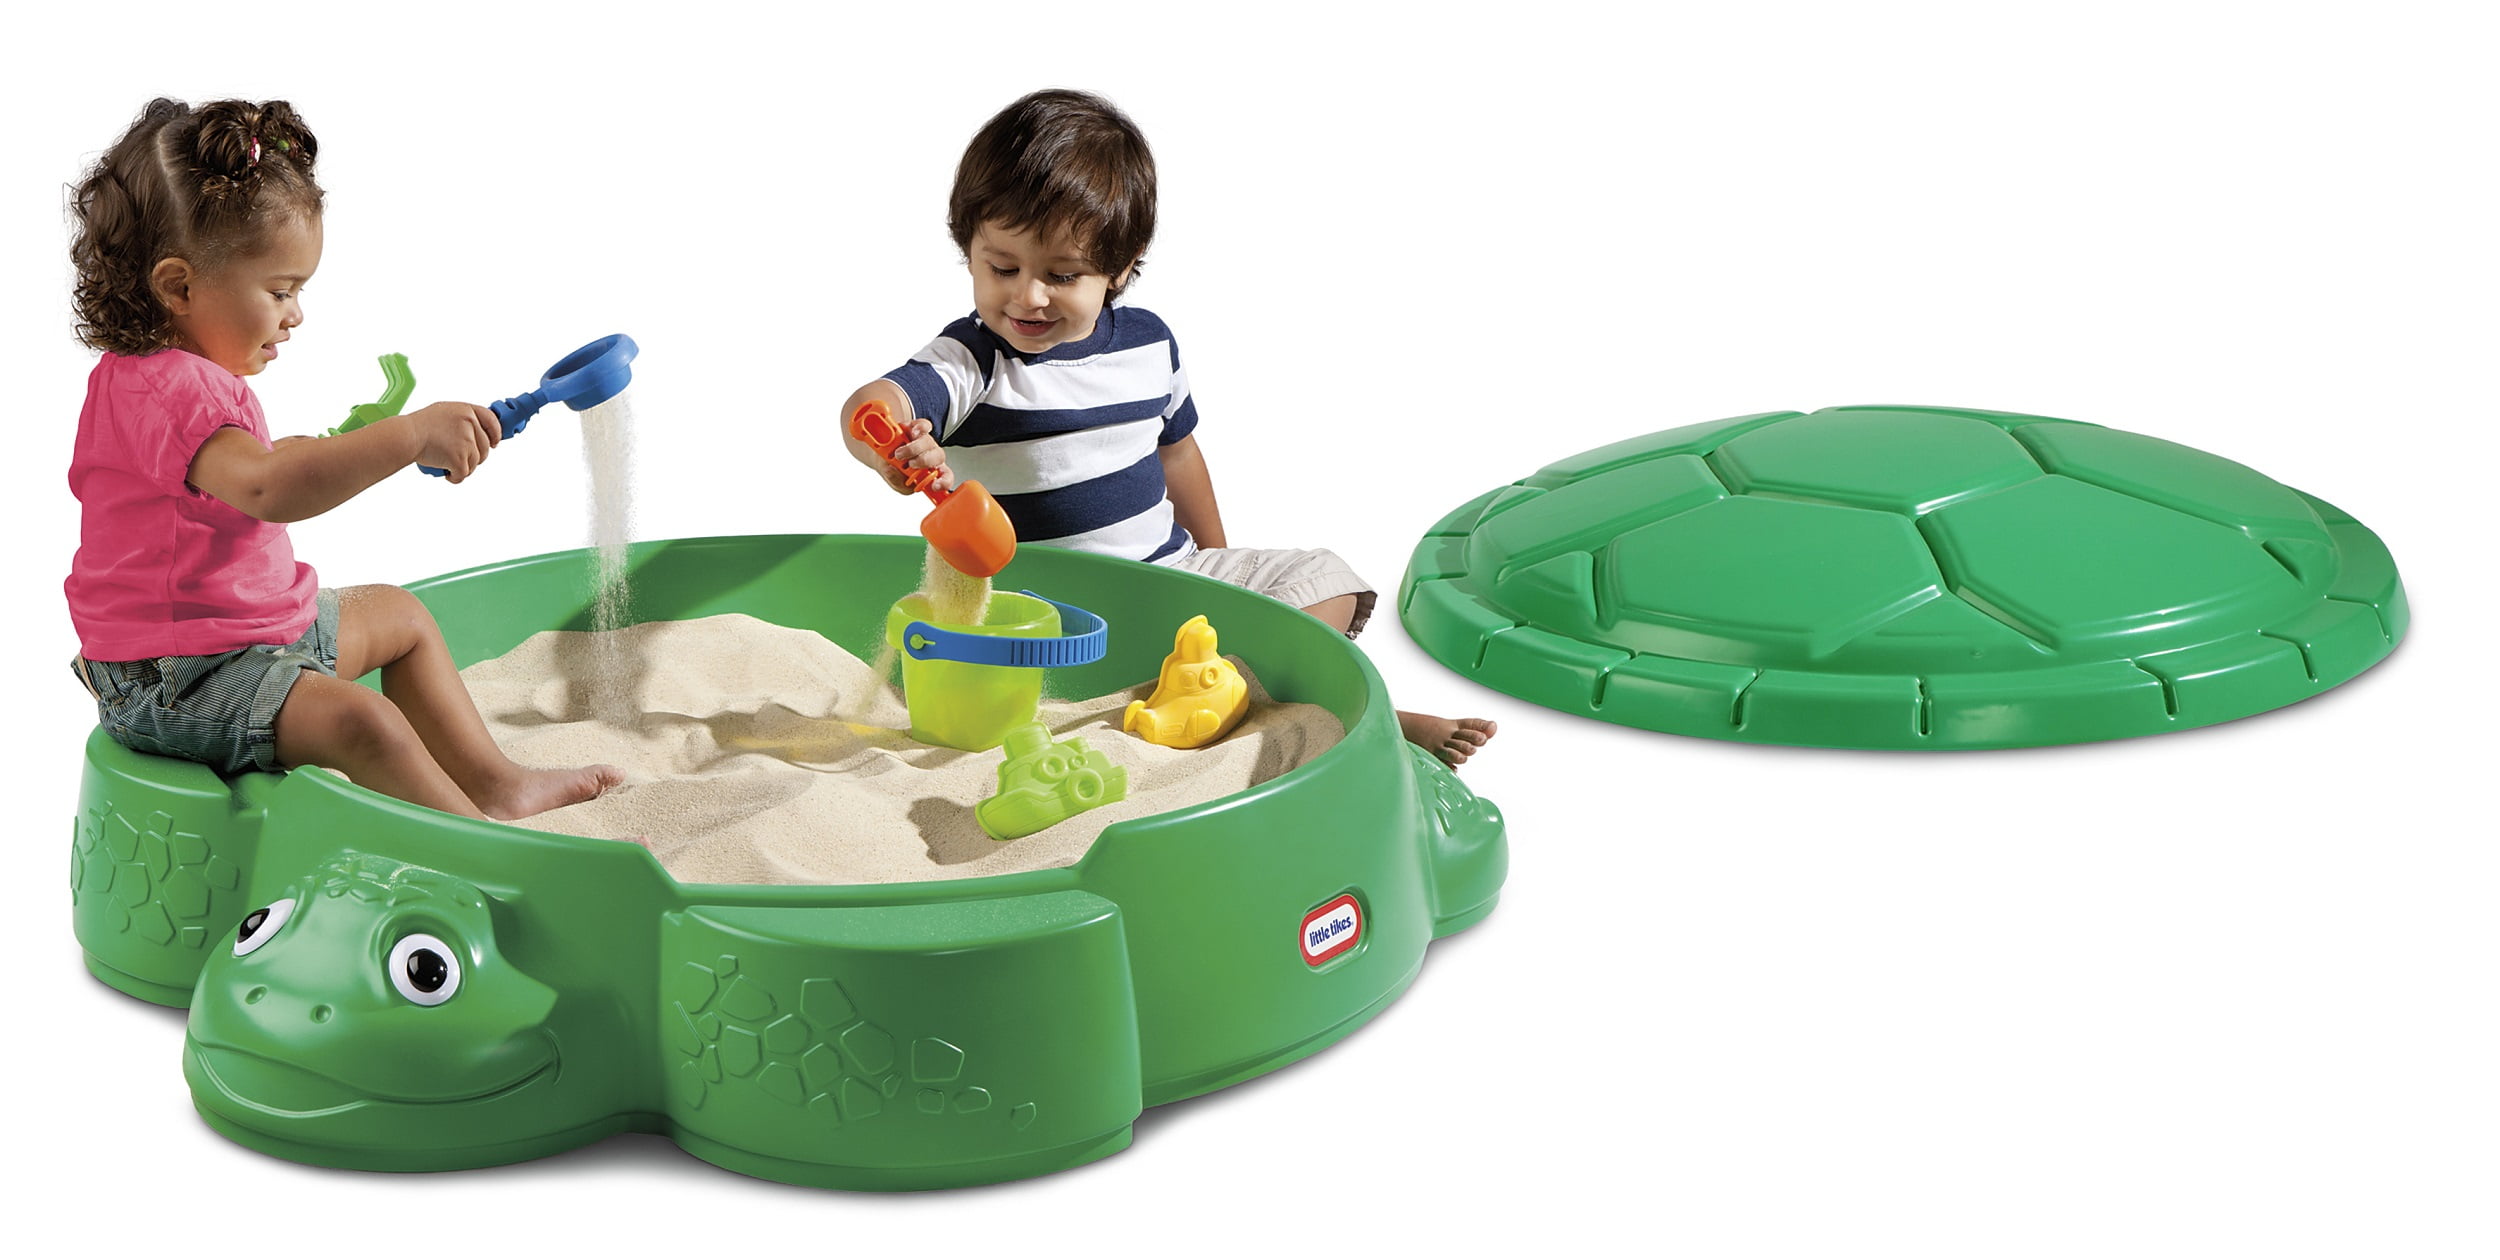 Classic Turtle Sandbox Friendly Moulded in Face Large Area Sand Play Removable 